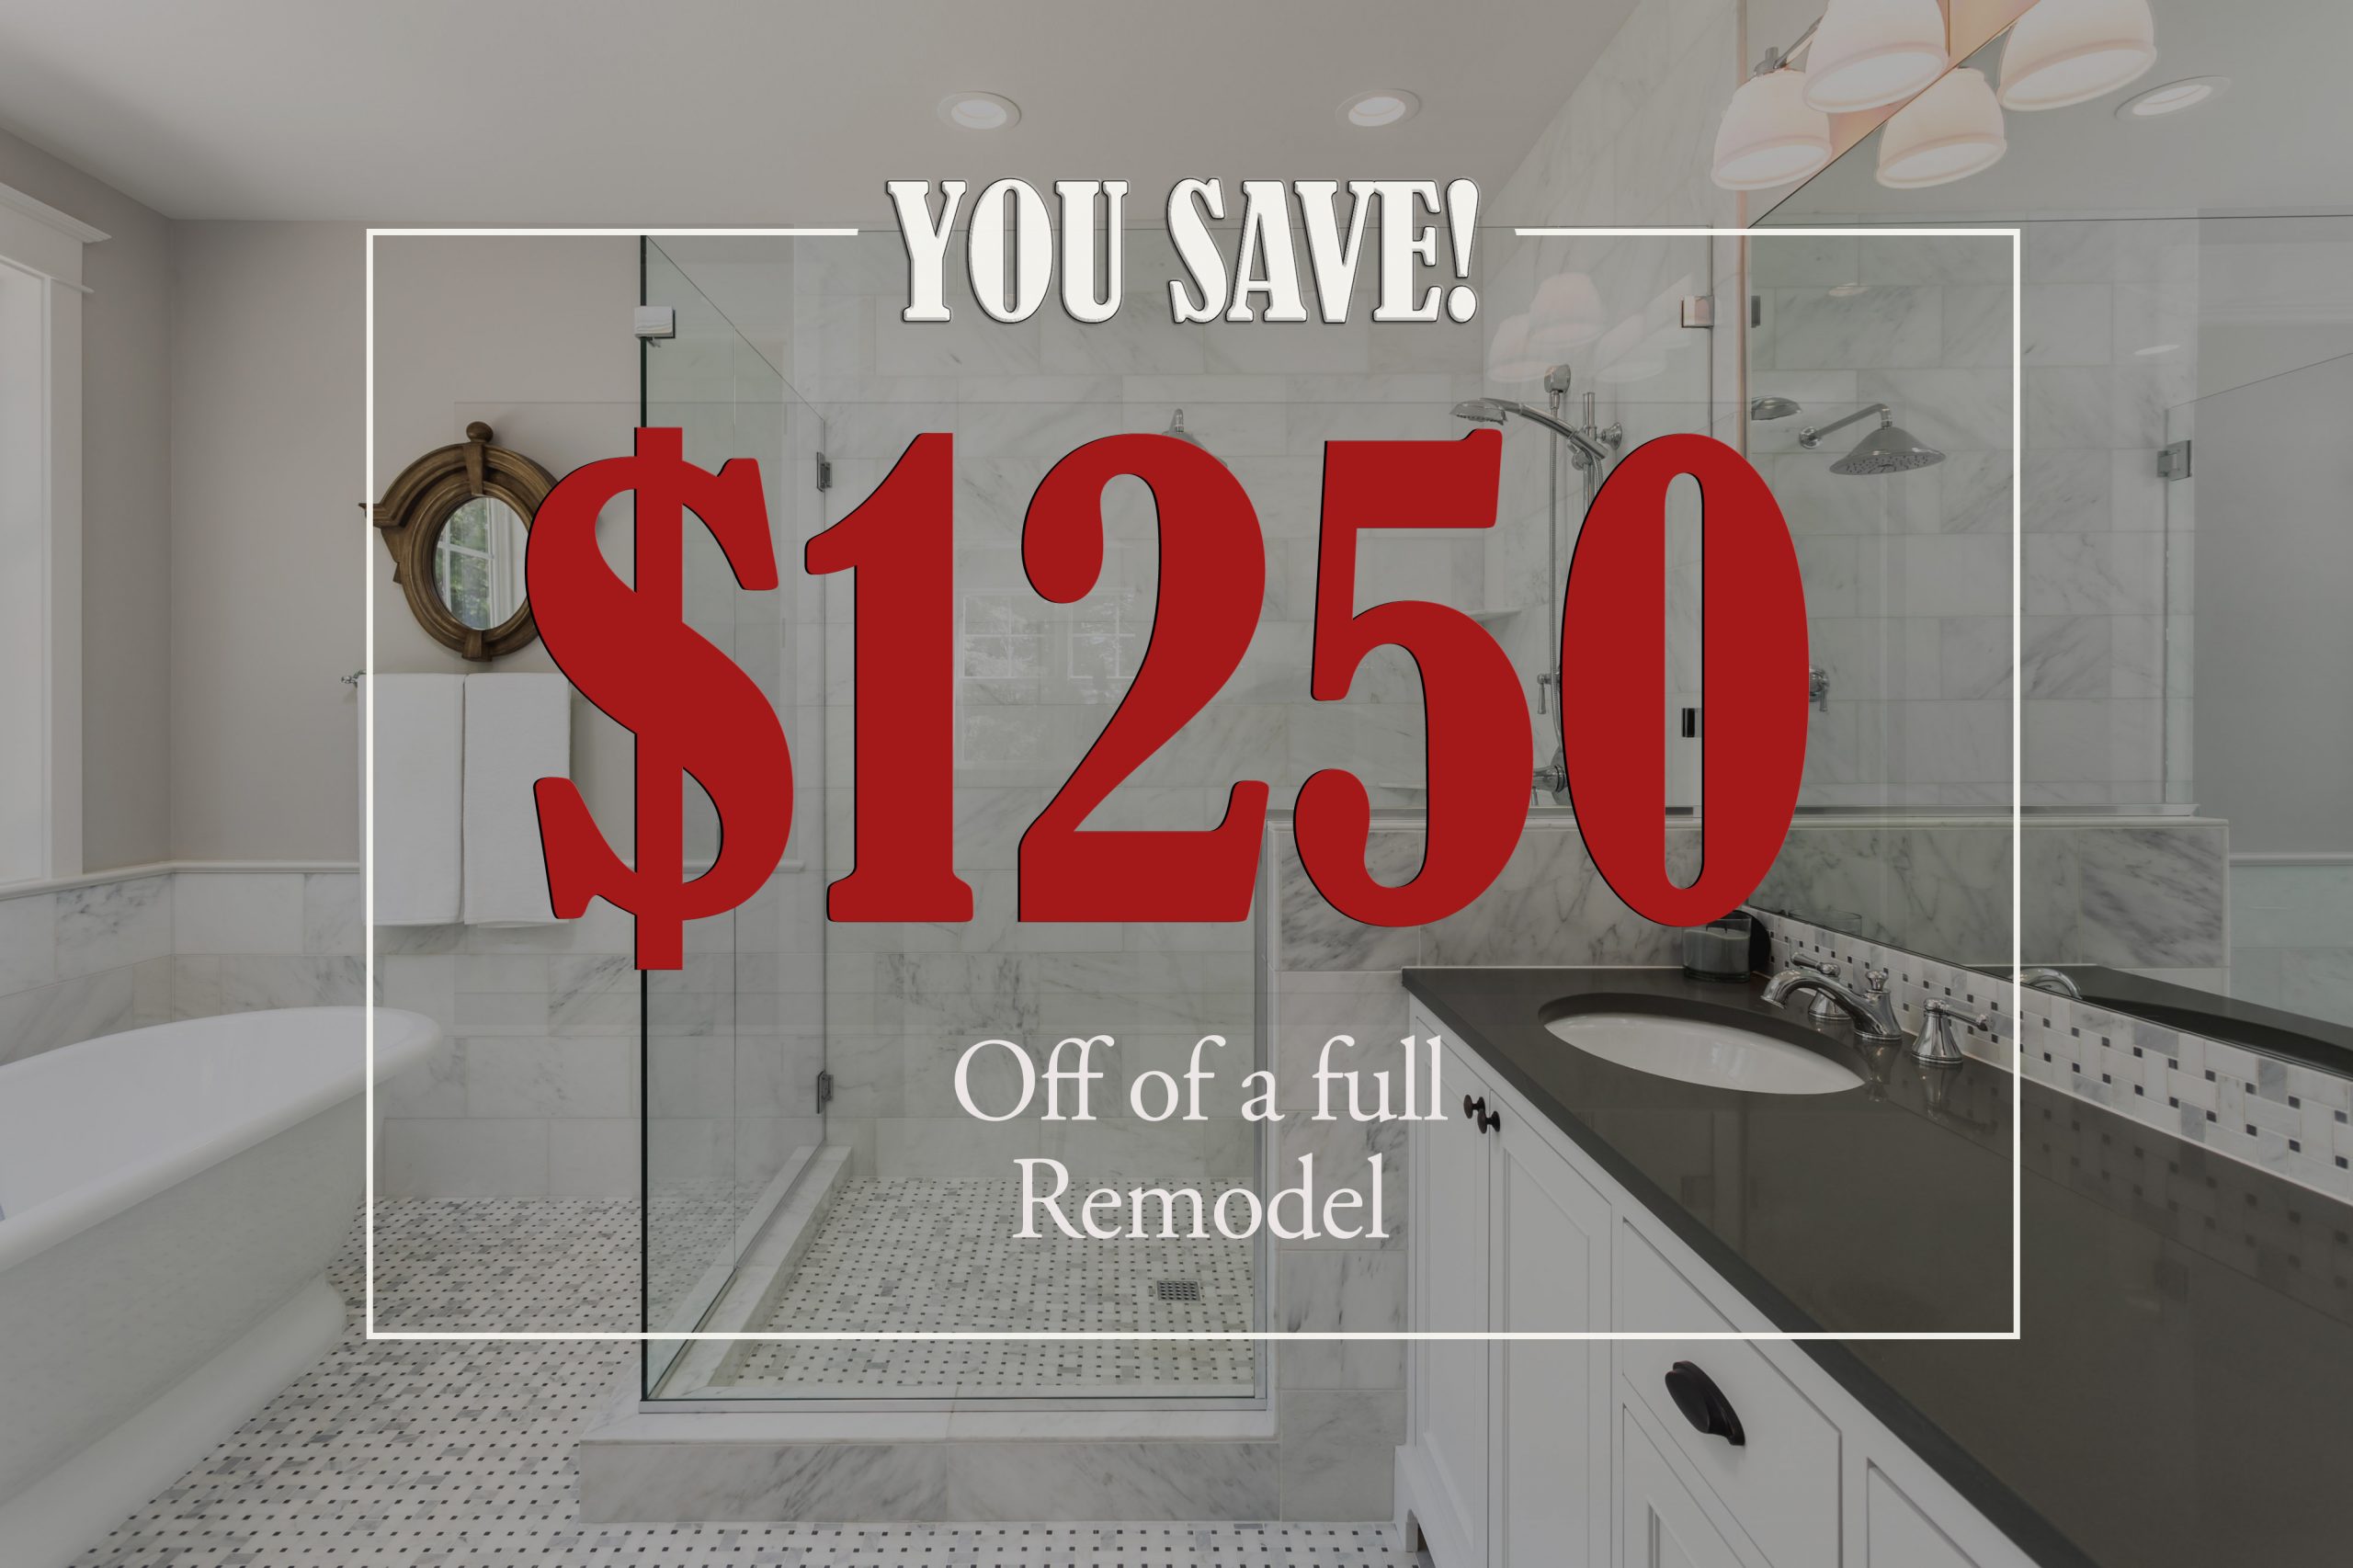 Save $1250 off a full remodel